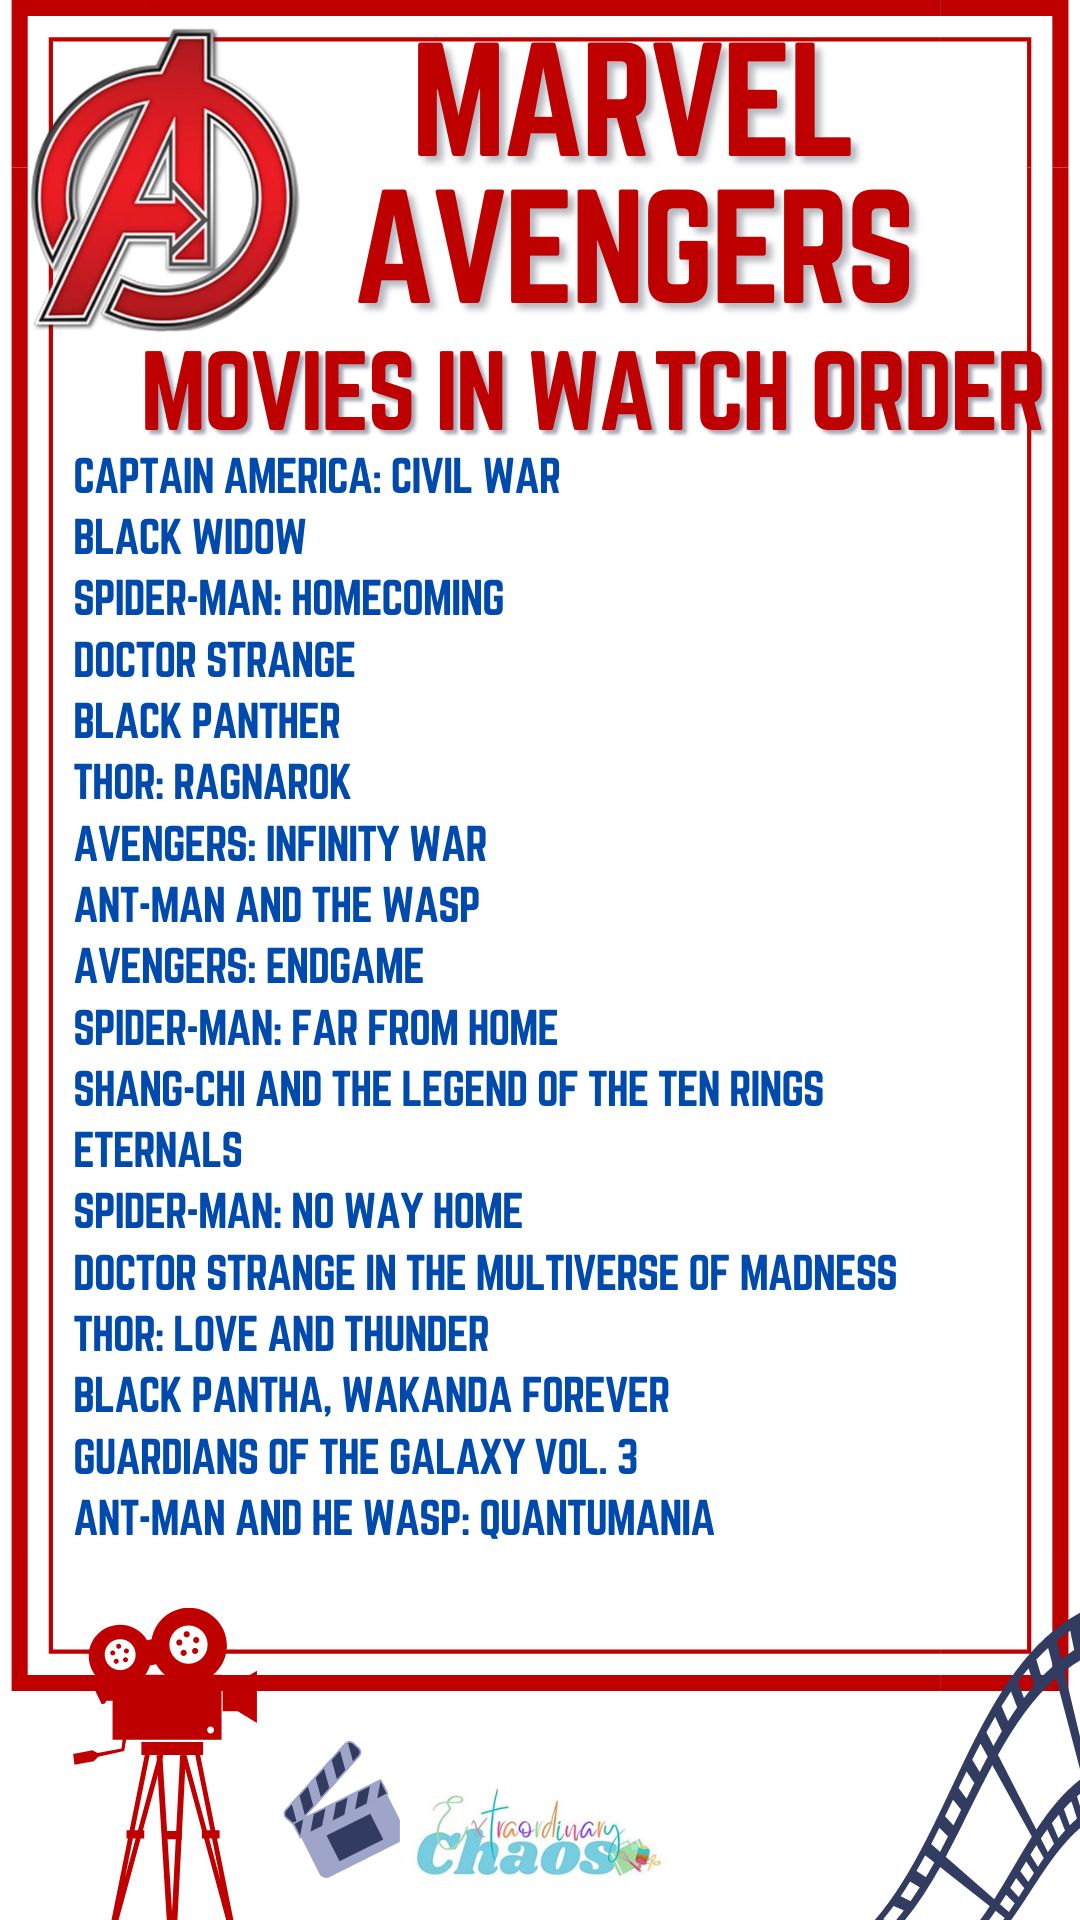 Avengers Marvel Movies in Order